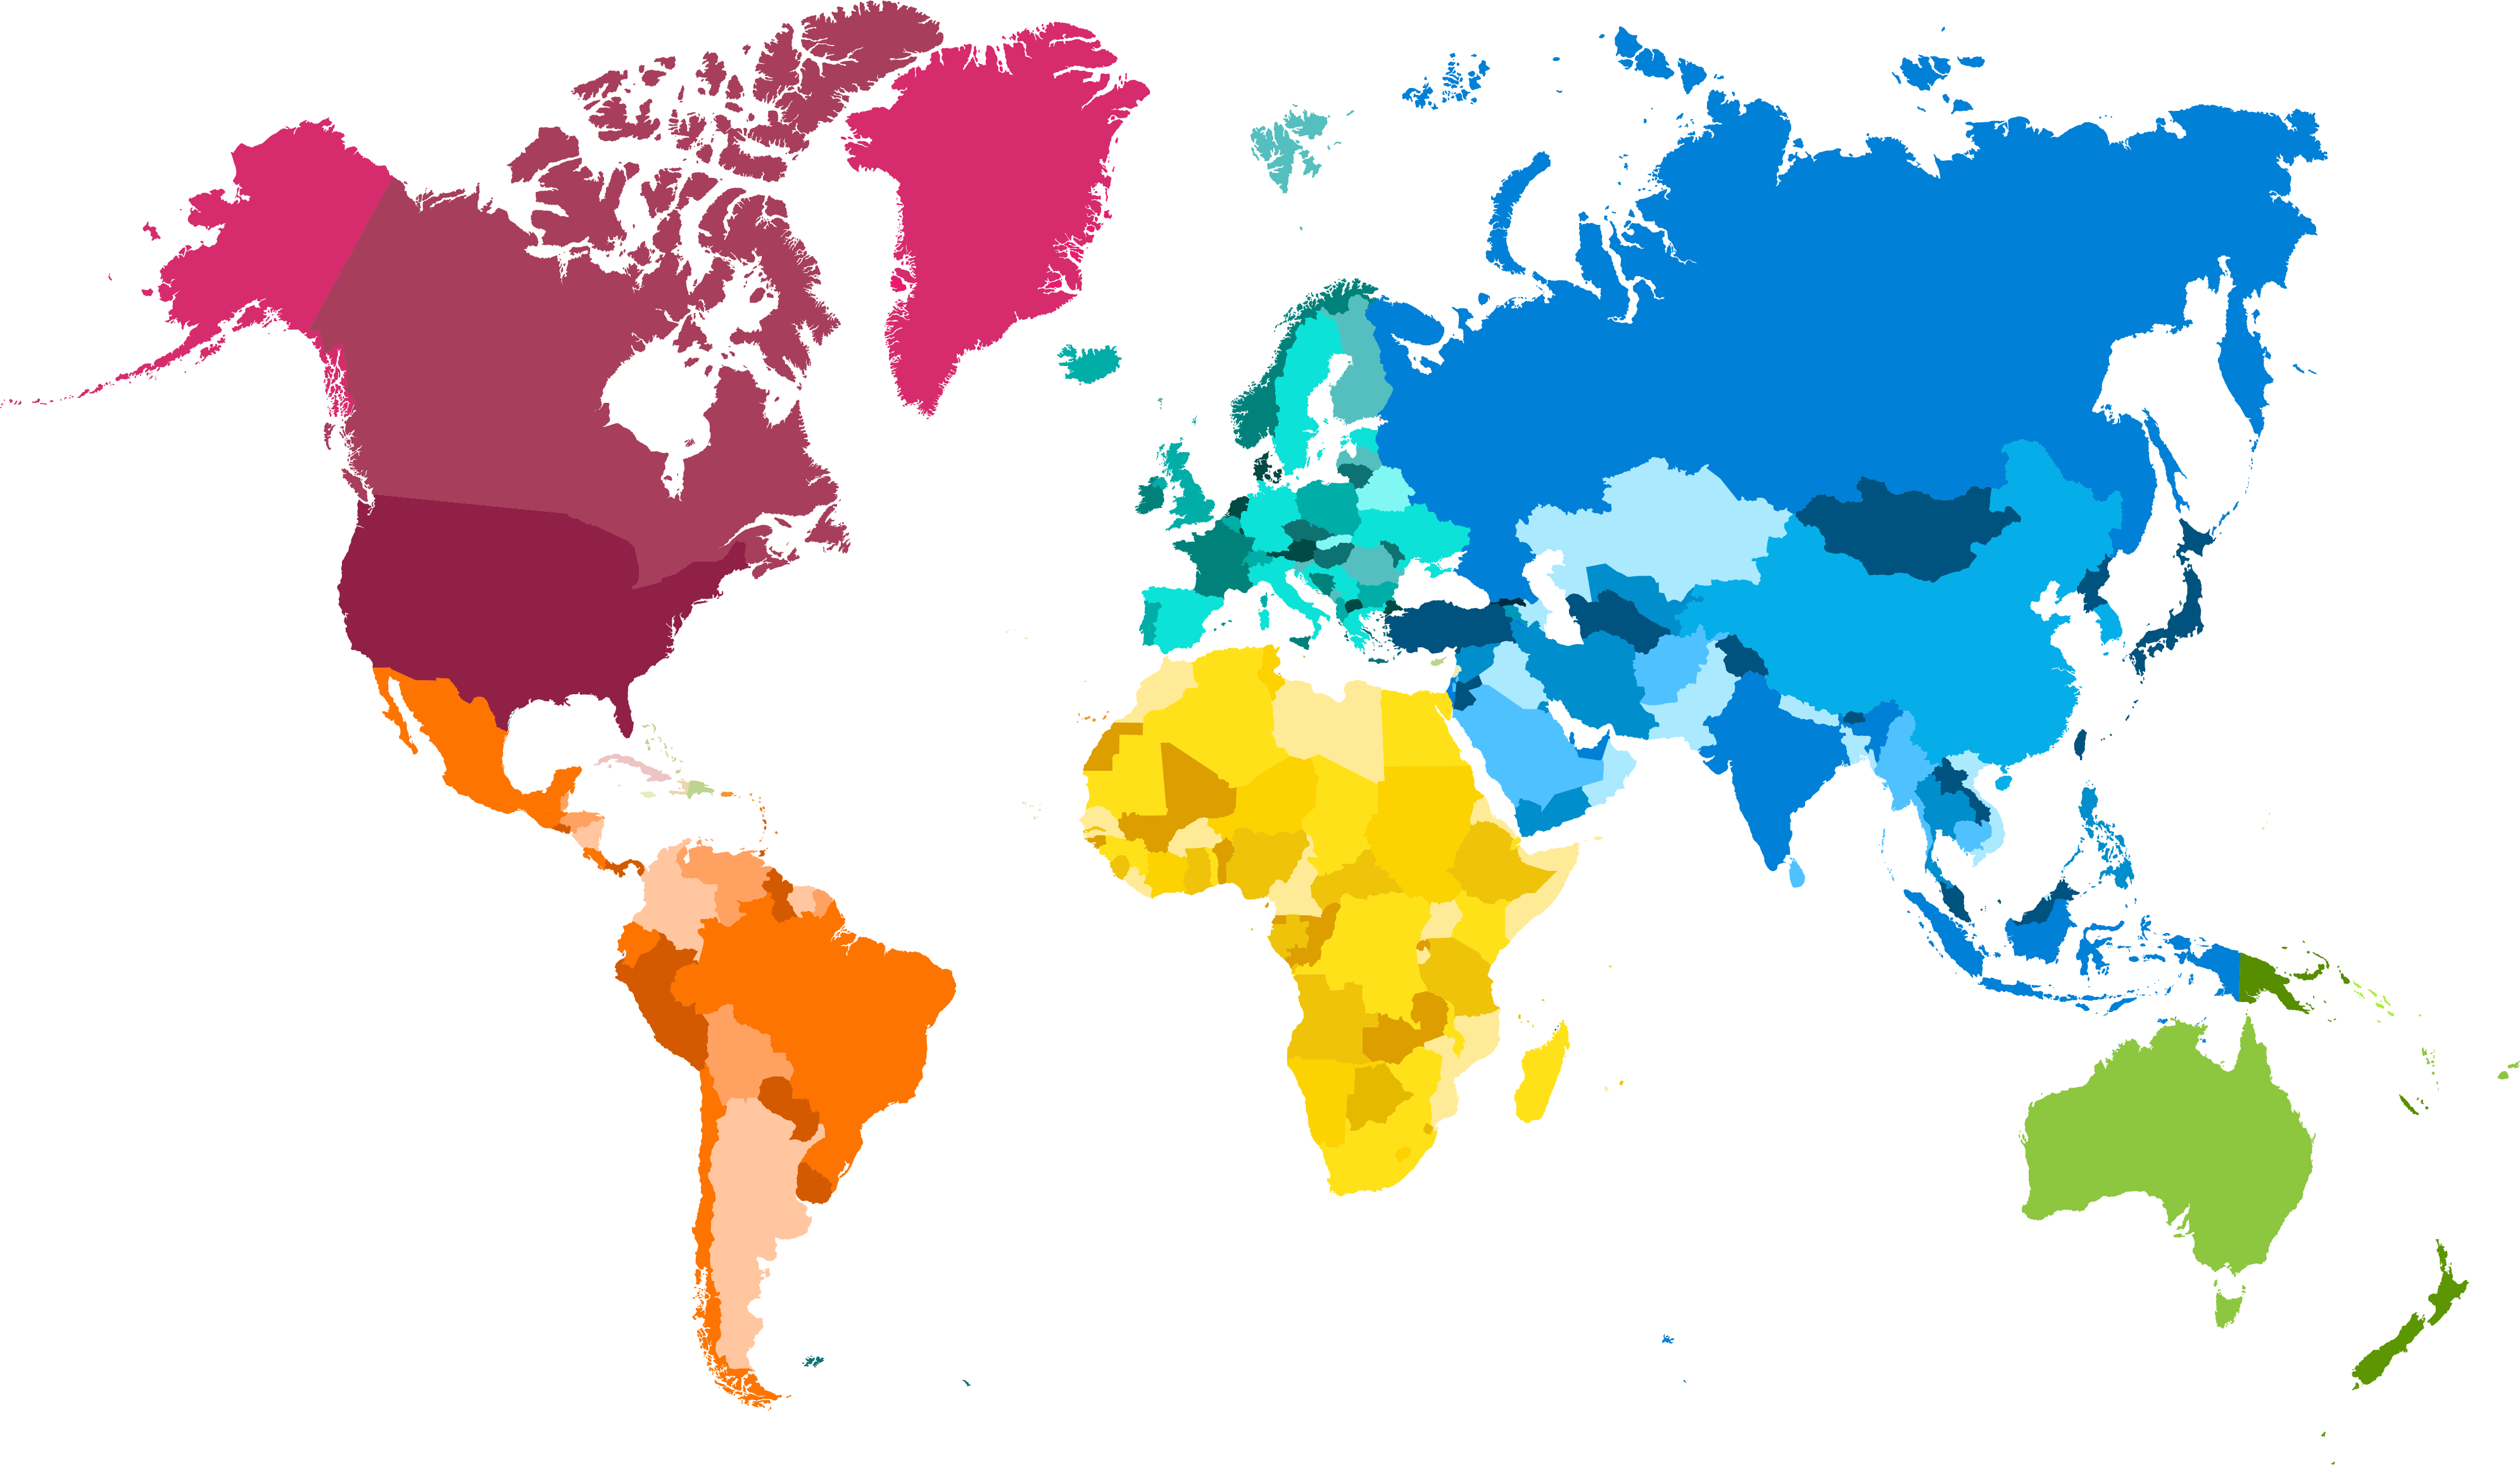 Culture Map Of The World